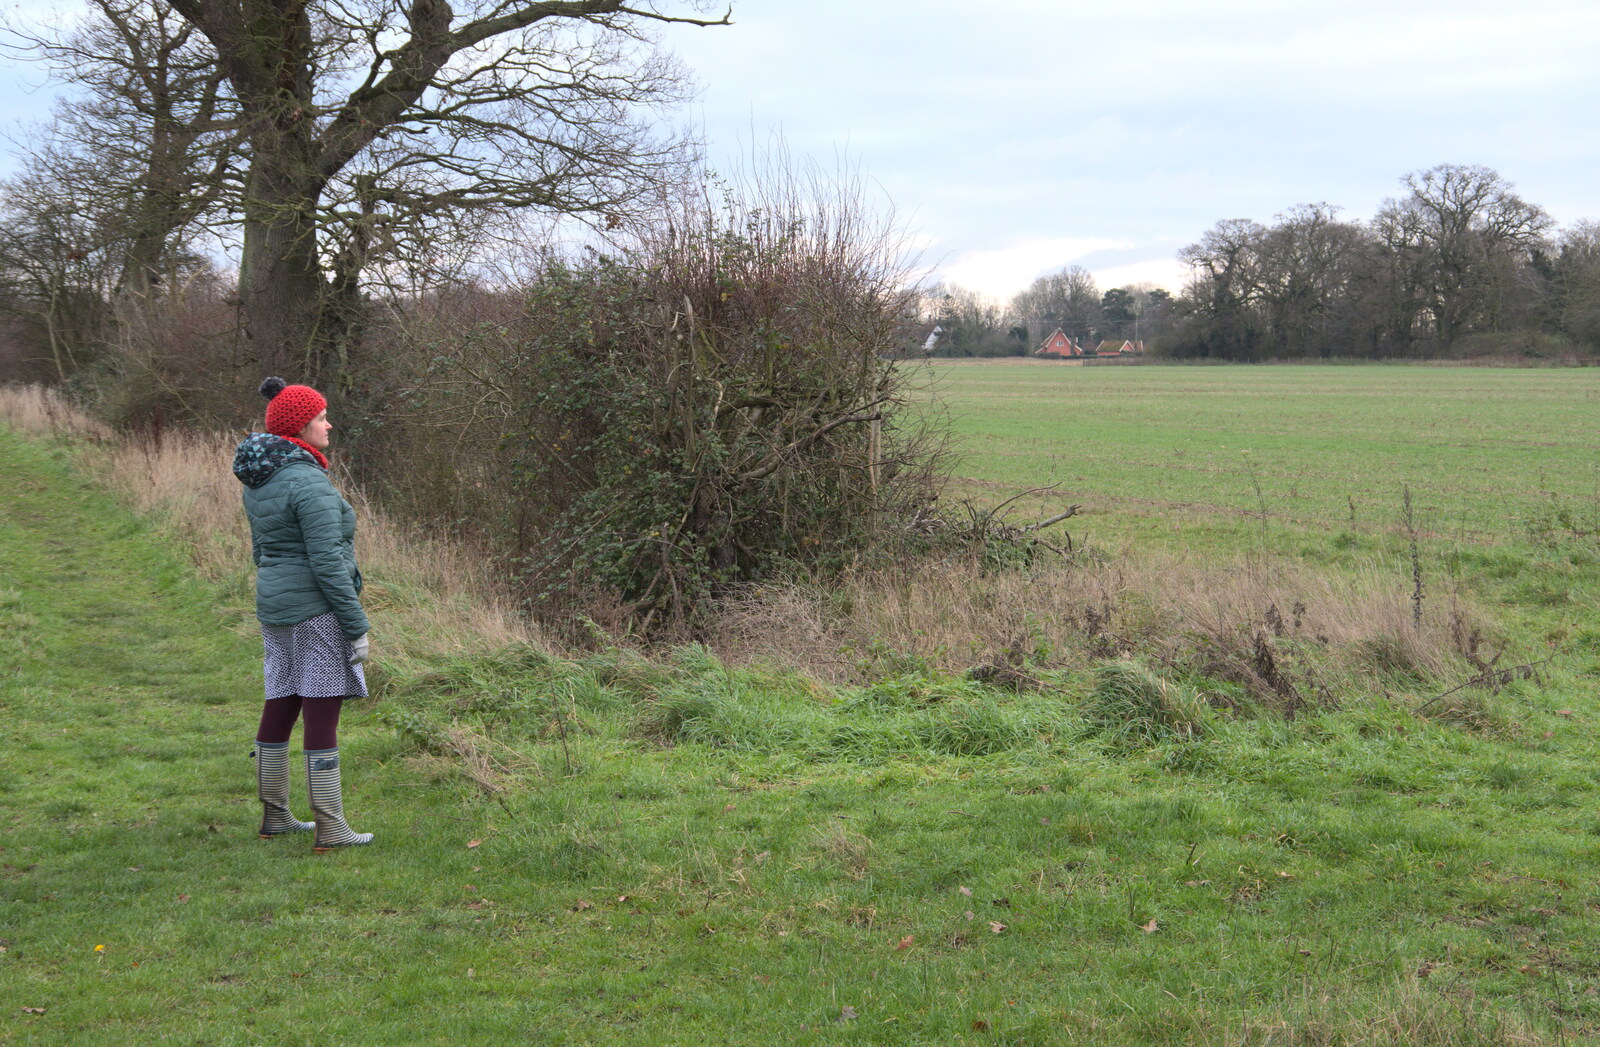 Isobel looks out over a field from A Virtual New Year's Eve, Brome, Suffolk - 31st December 2020